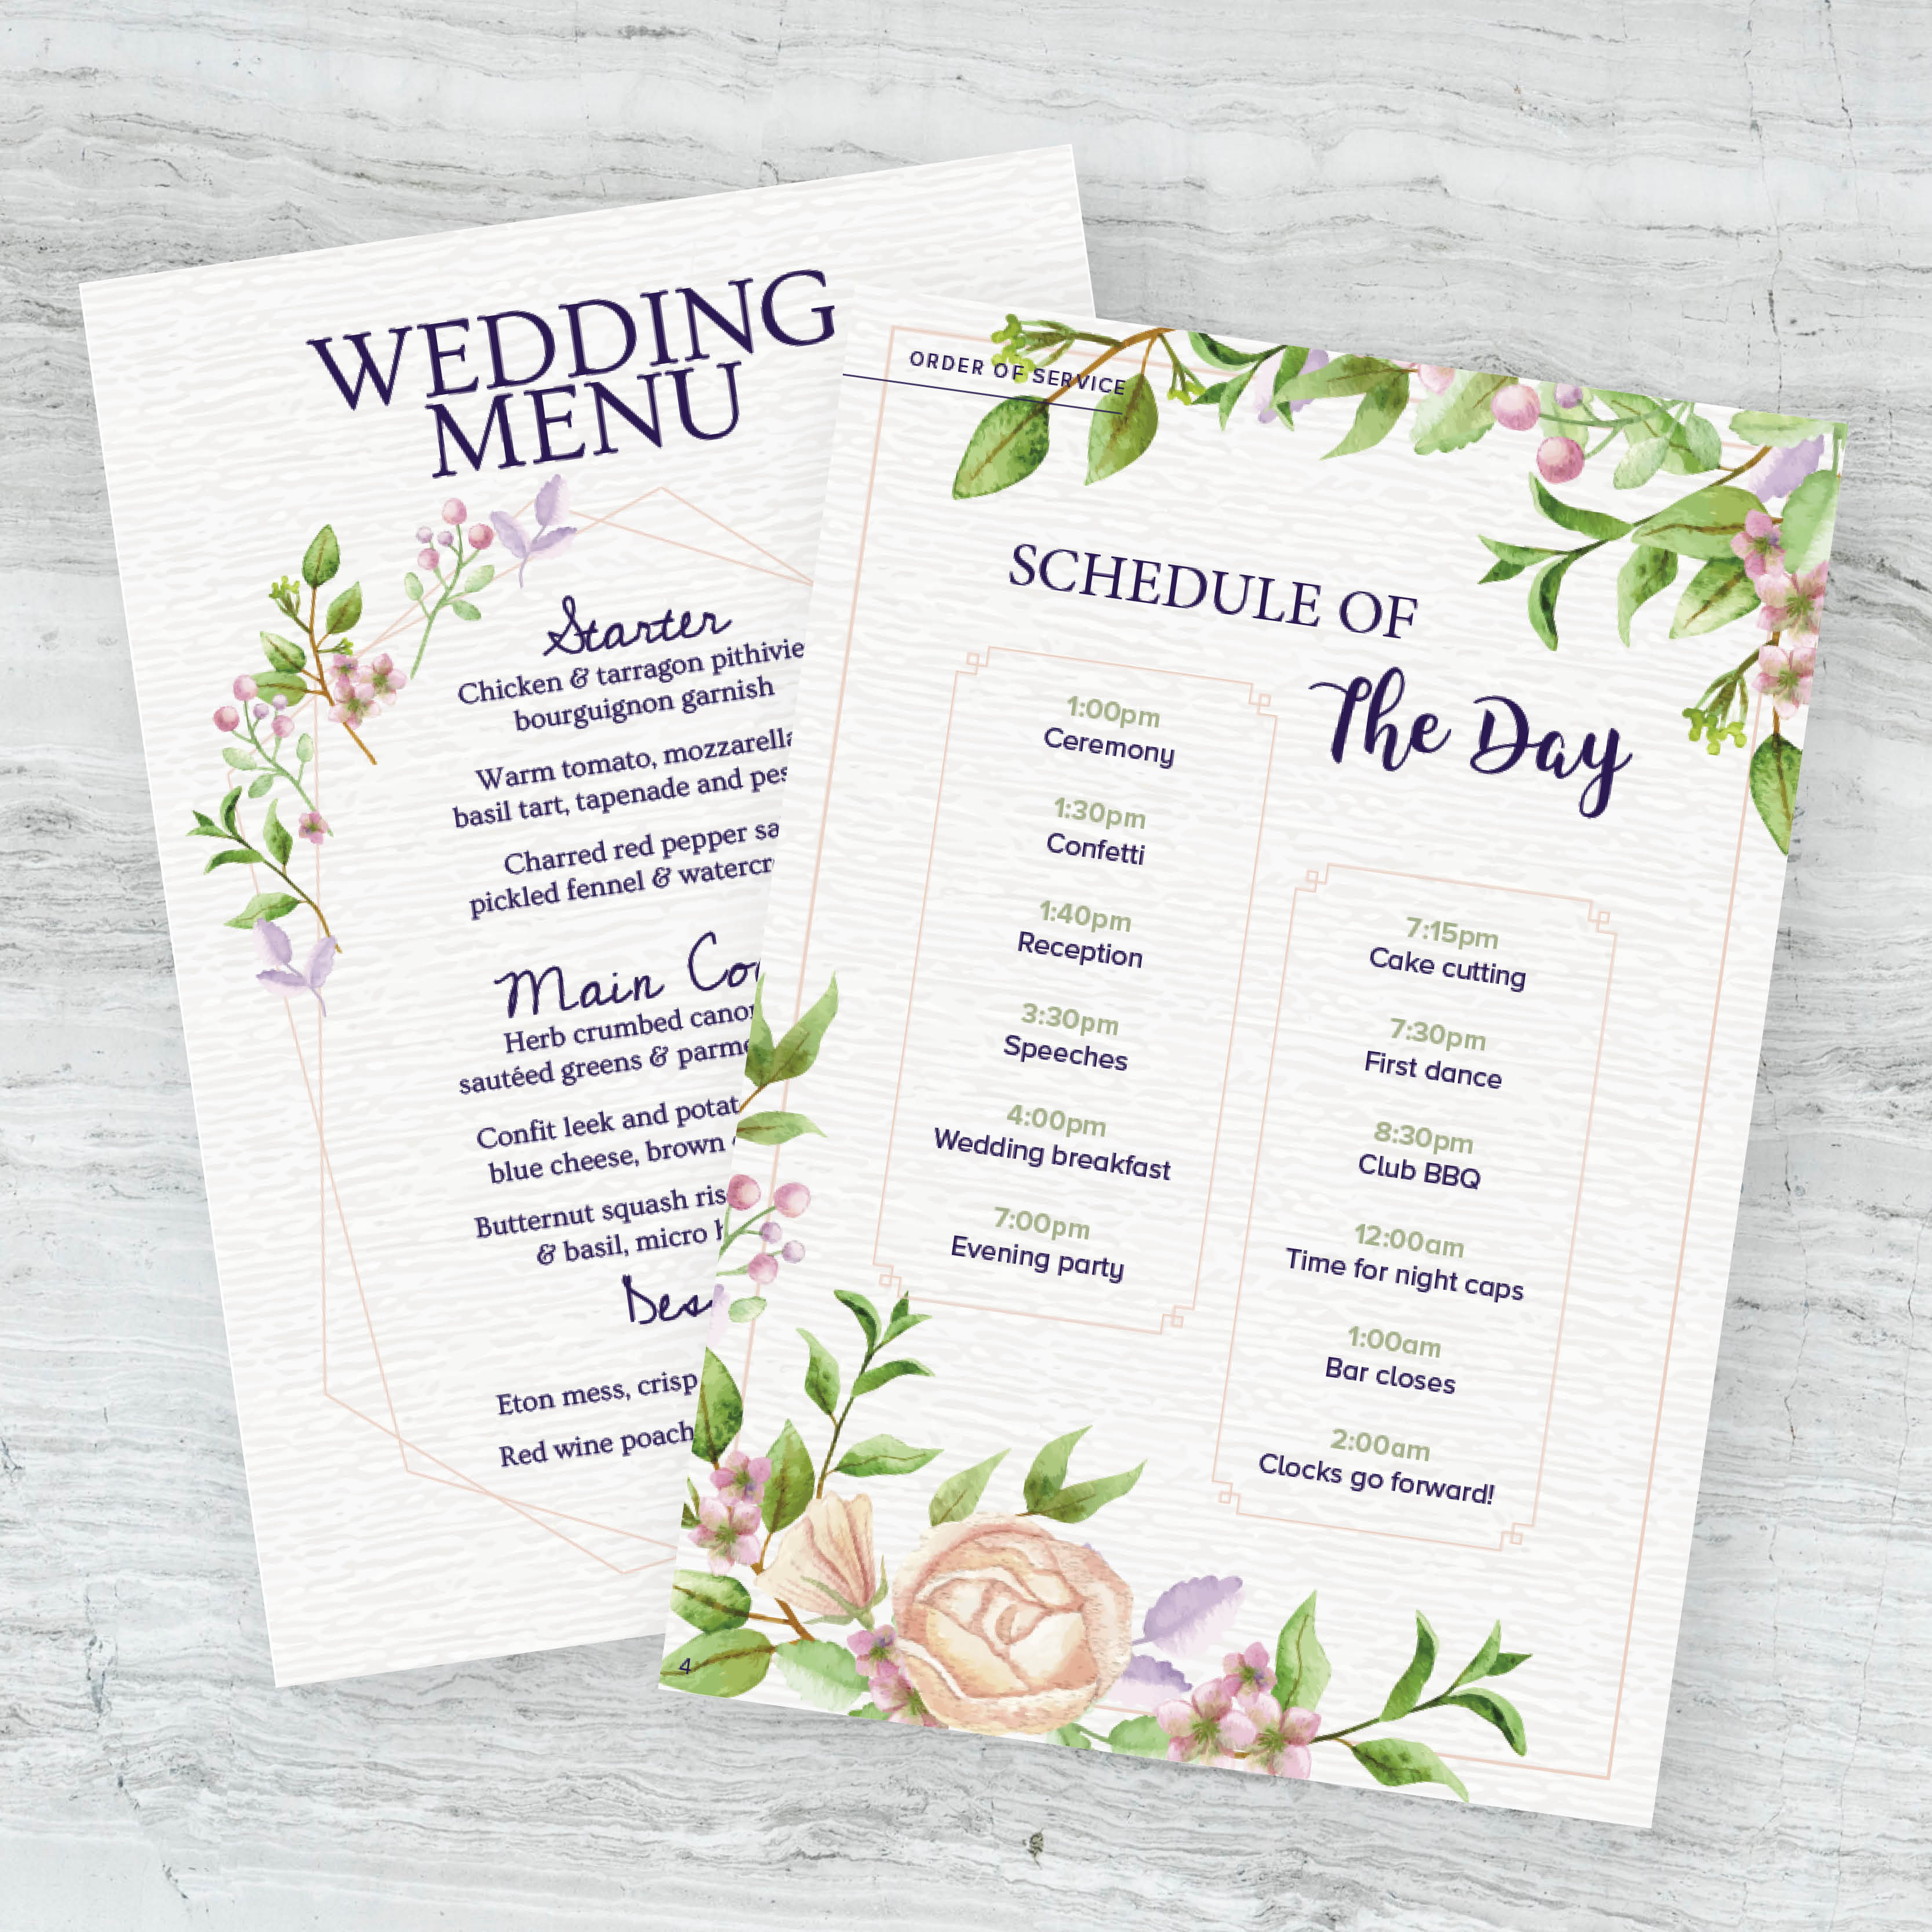 Personalised wedding stationery, unique order of the day for wedding